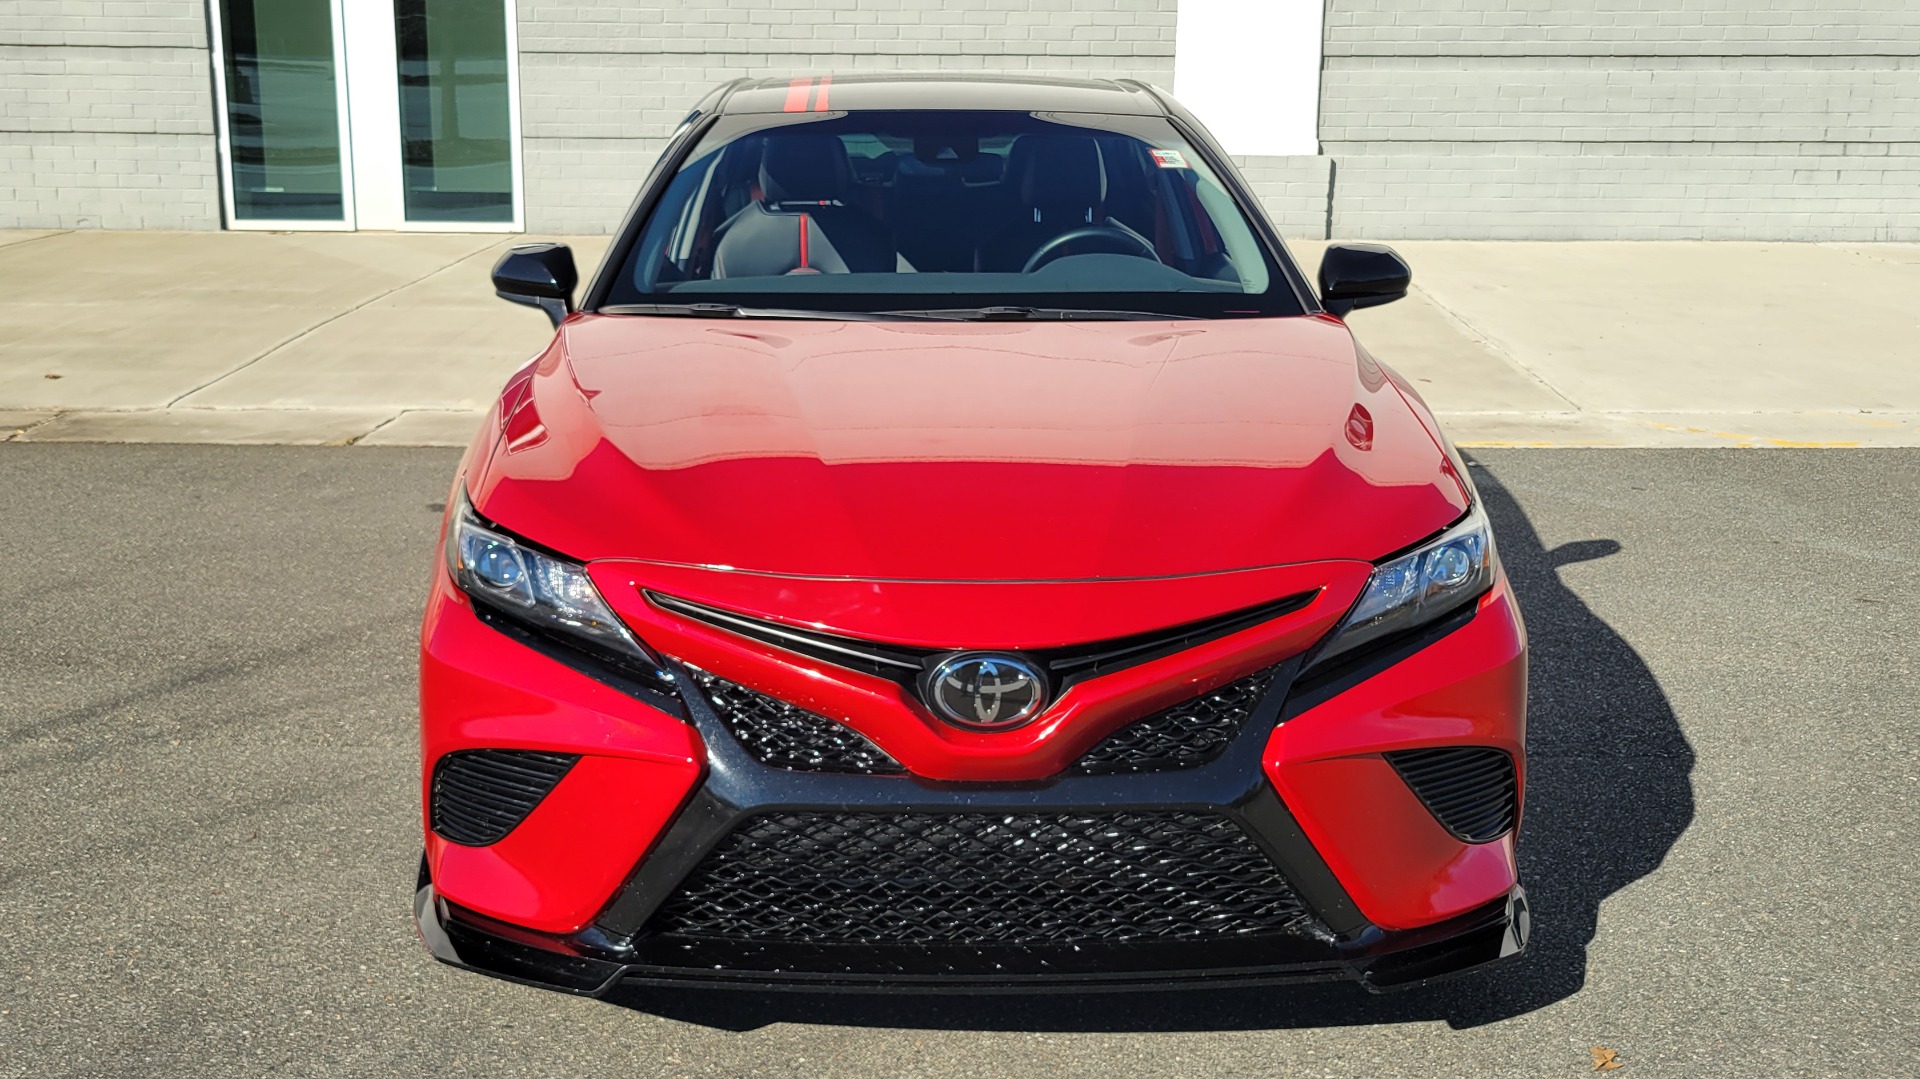 Used 2020 Toyota CAMRY TRD 3.5L V6 SEDAN / 8-SPEED AUTO / CLOTH SEATS / REARVIEW for sale $35,995 at Formula Imports in Charlotte NC 28227 26